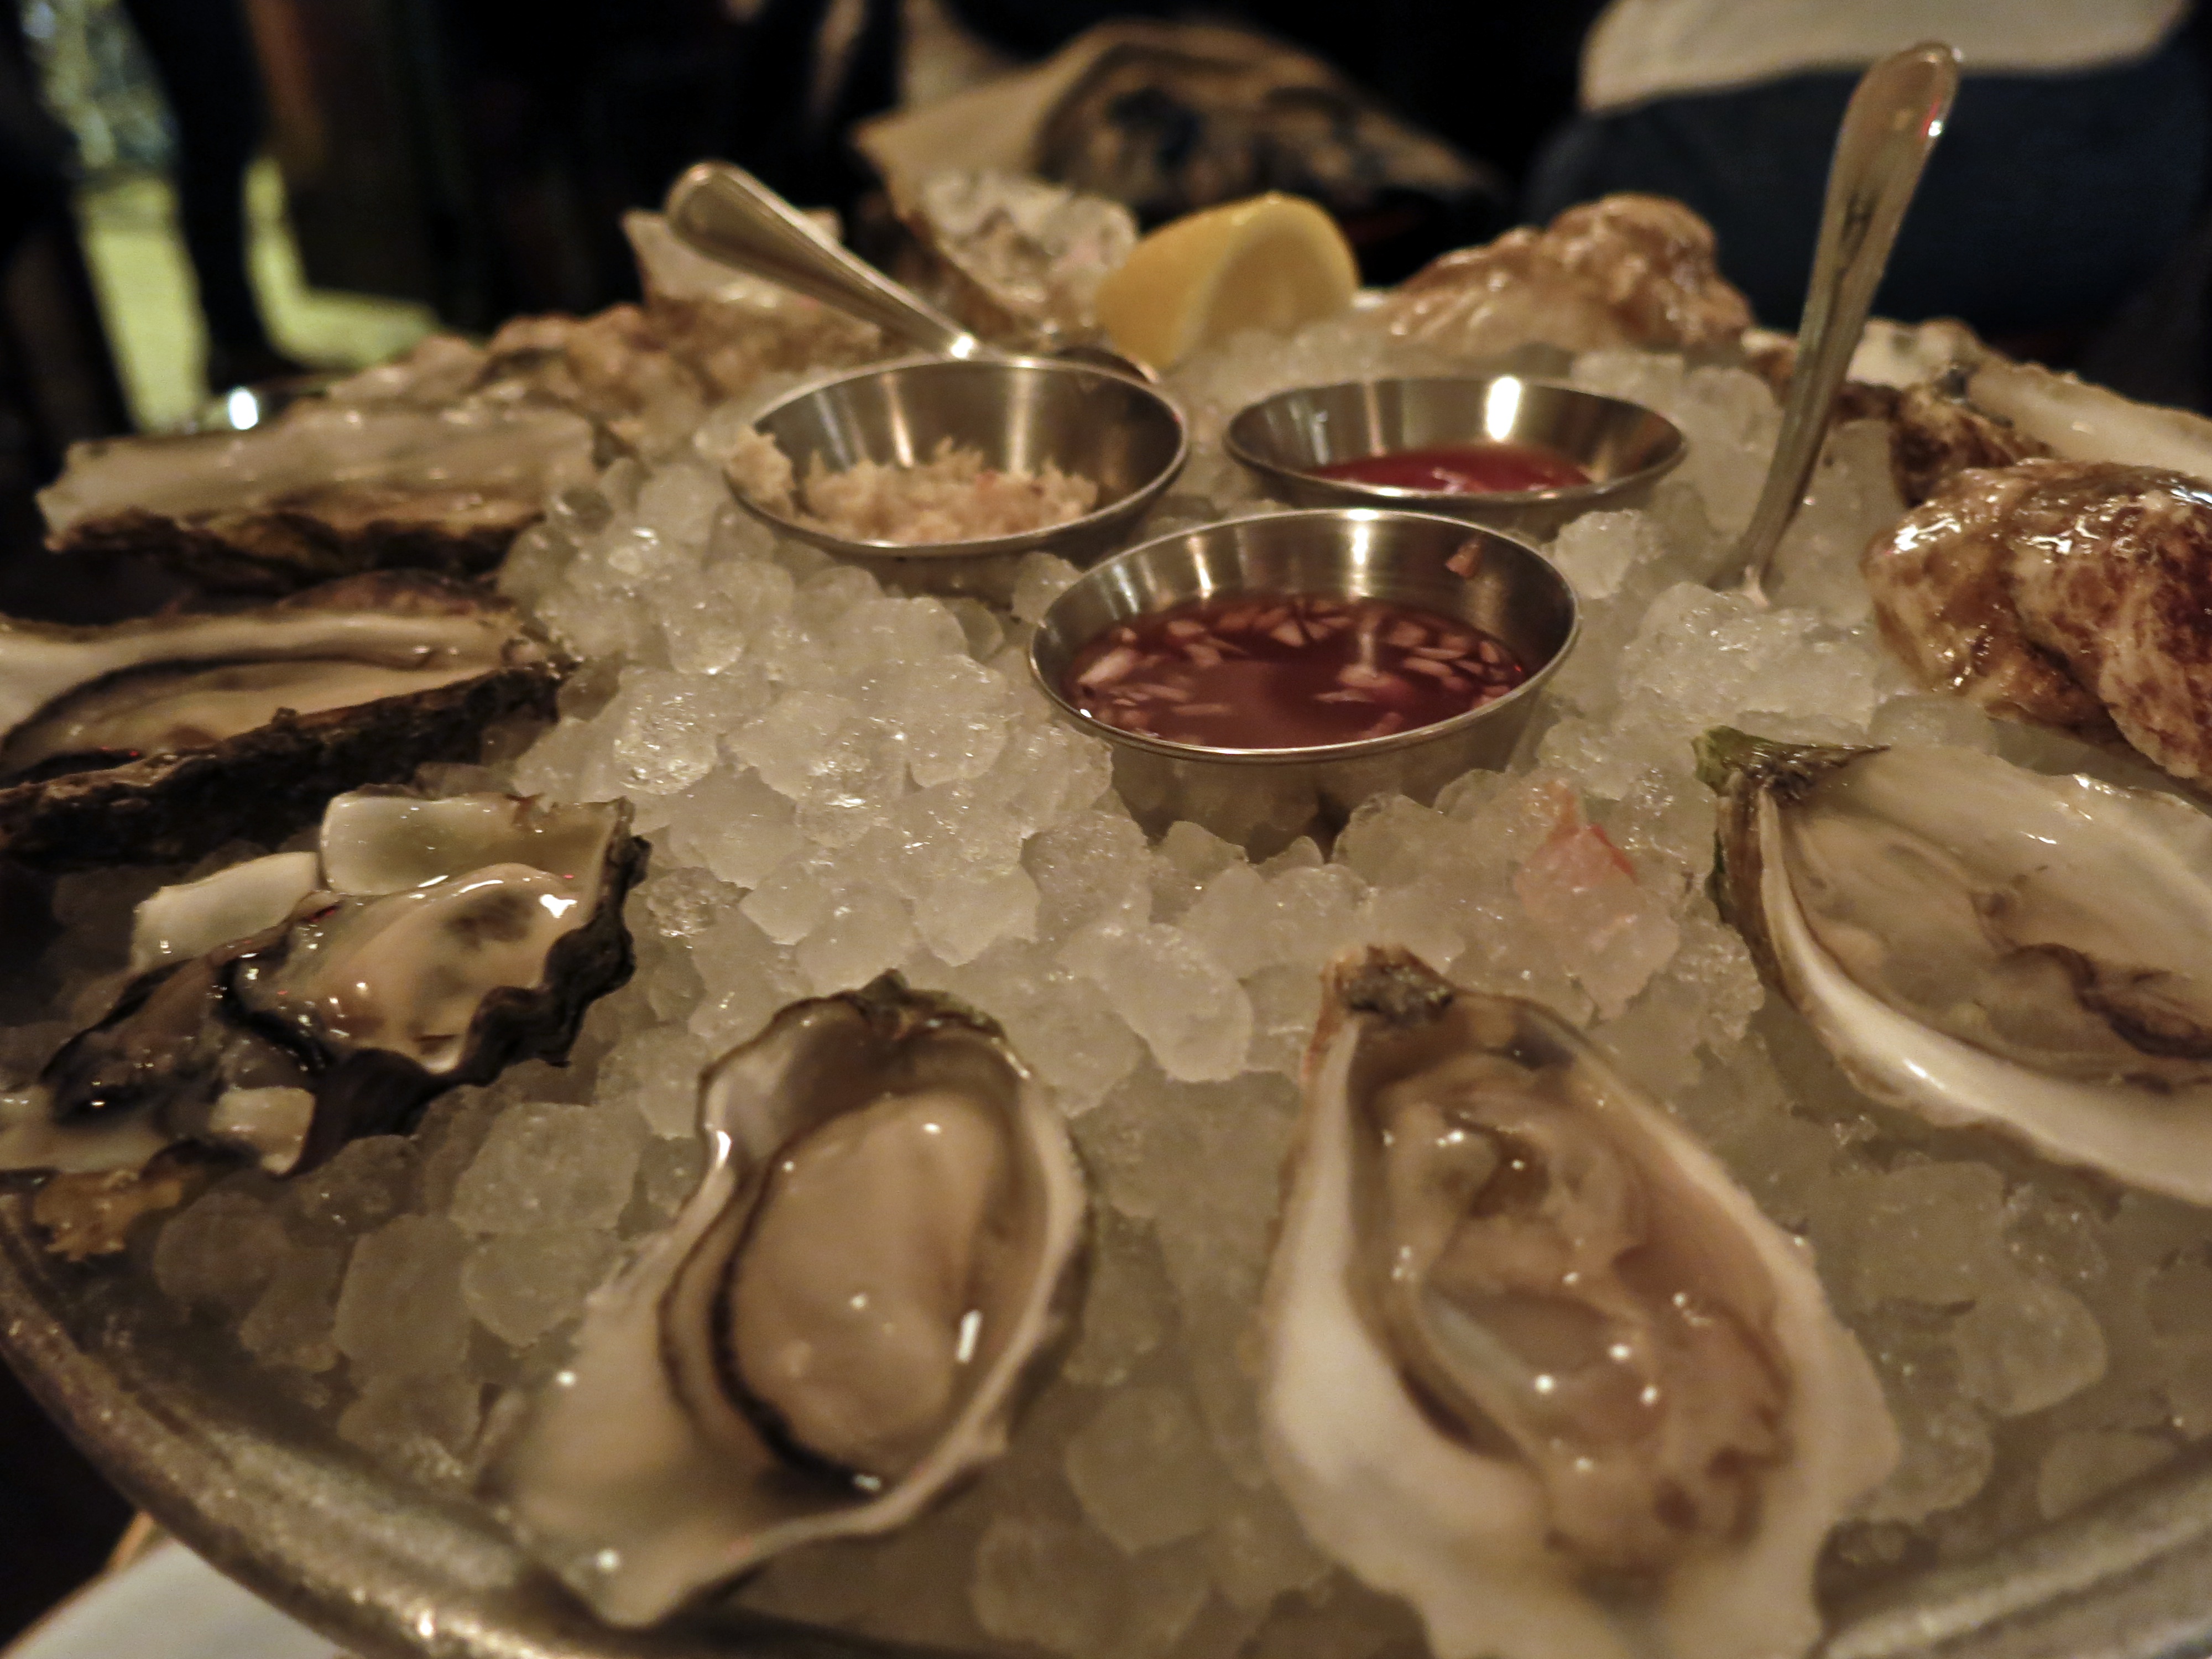 Maison Premiere nyc oysters